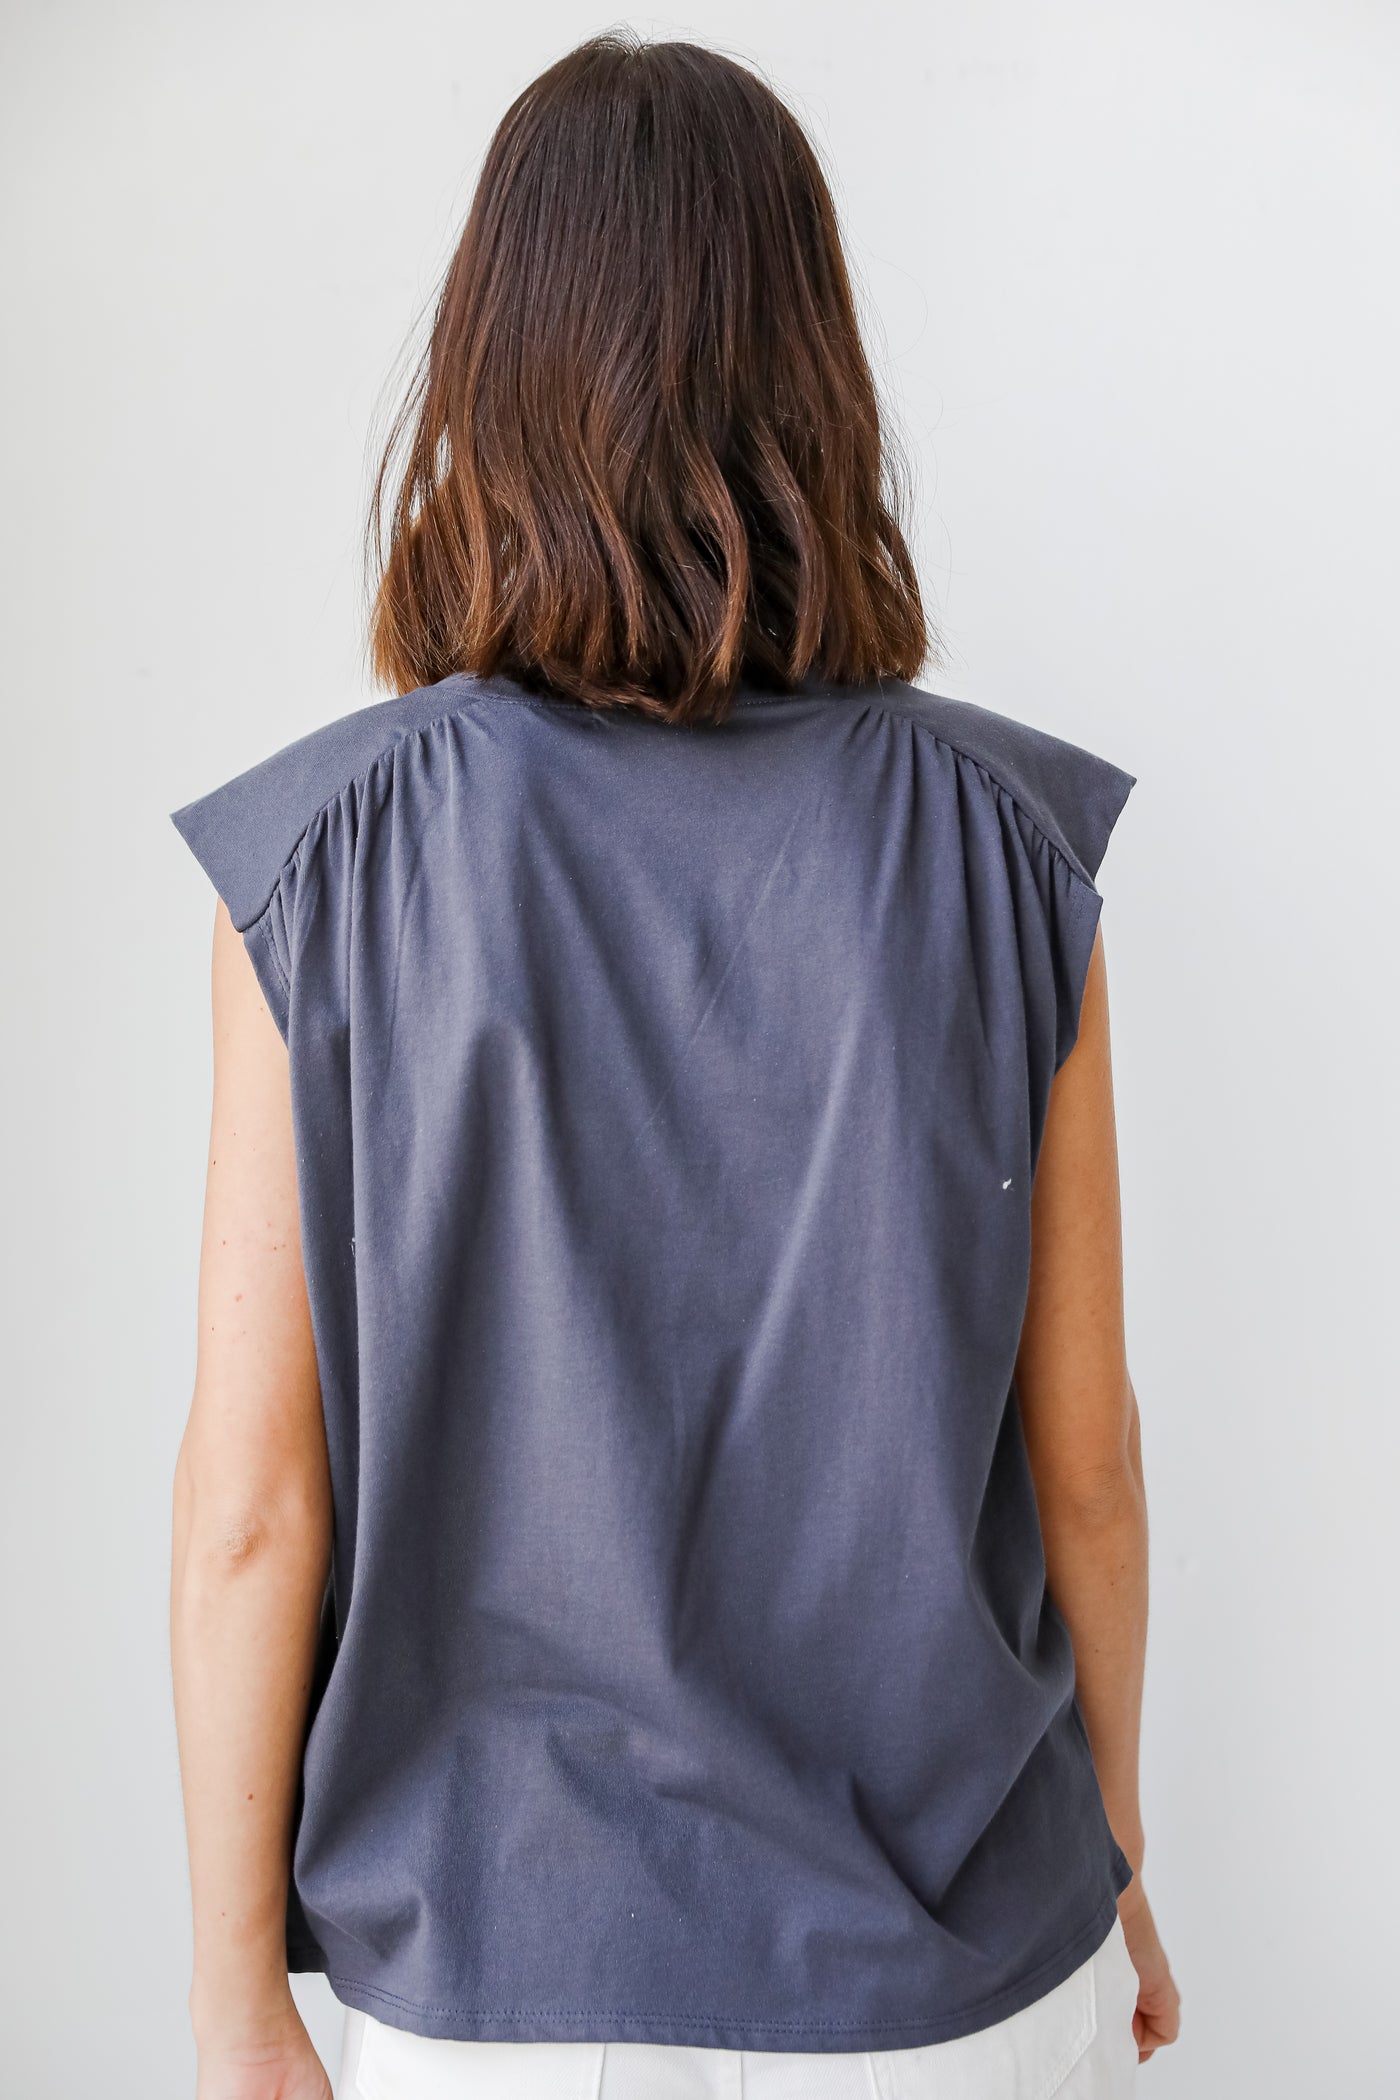 Charcoal Tee back view